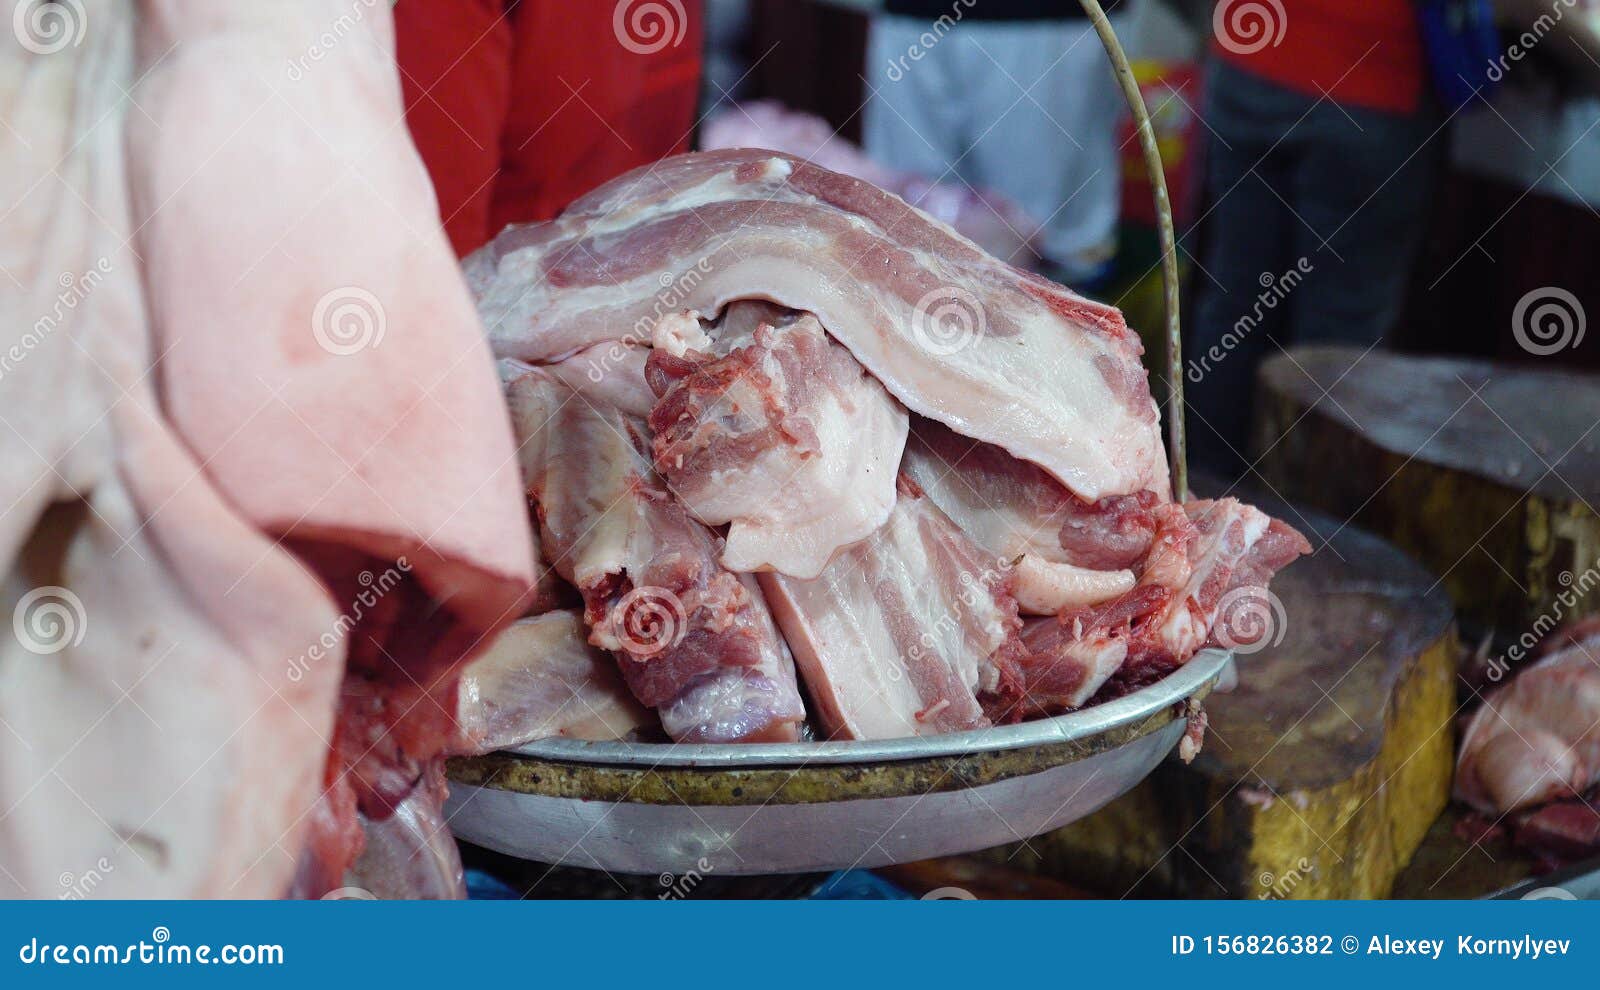 https://thumbs.dreamstime.com/z/seller-weighs-meat-scales-market-butcher-weighs-raw-meat-weighing-scales-sale-street-market-156826382.jpg